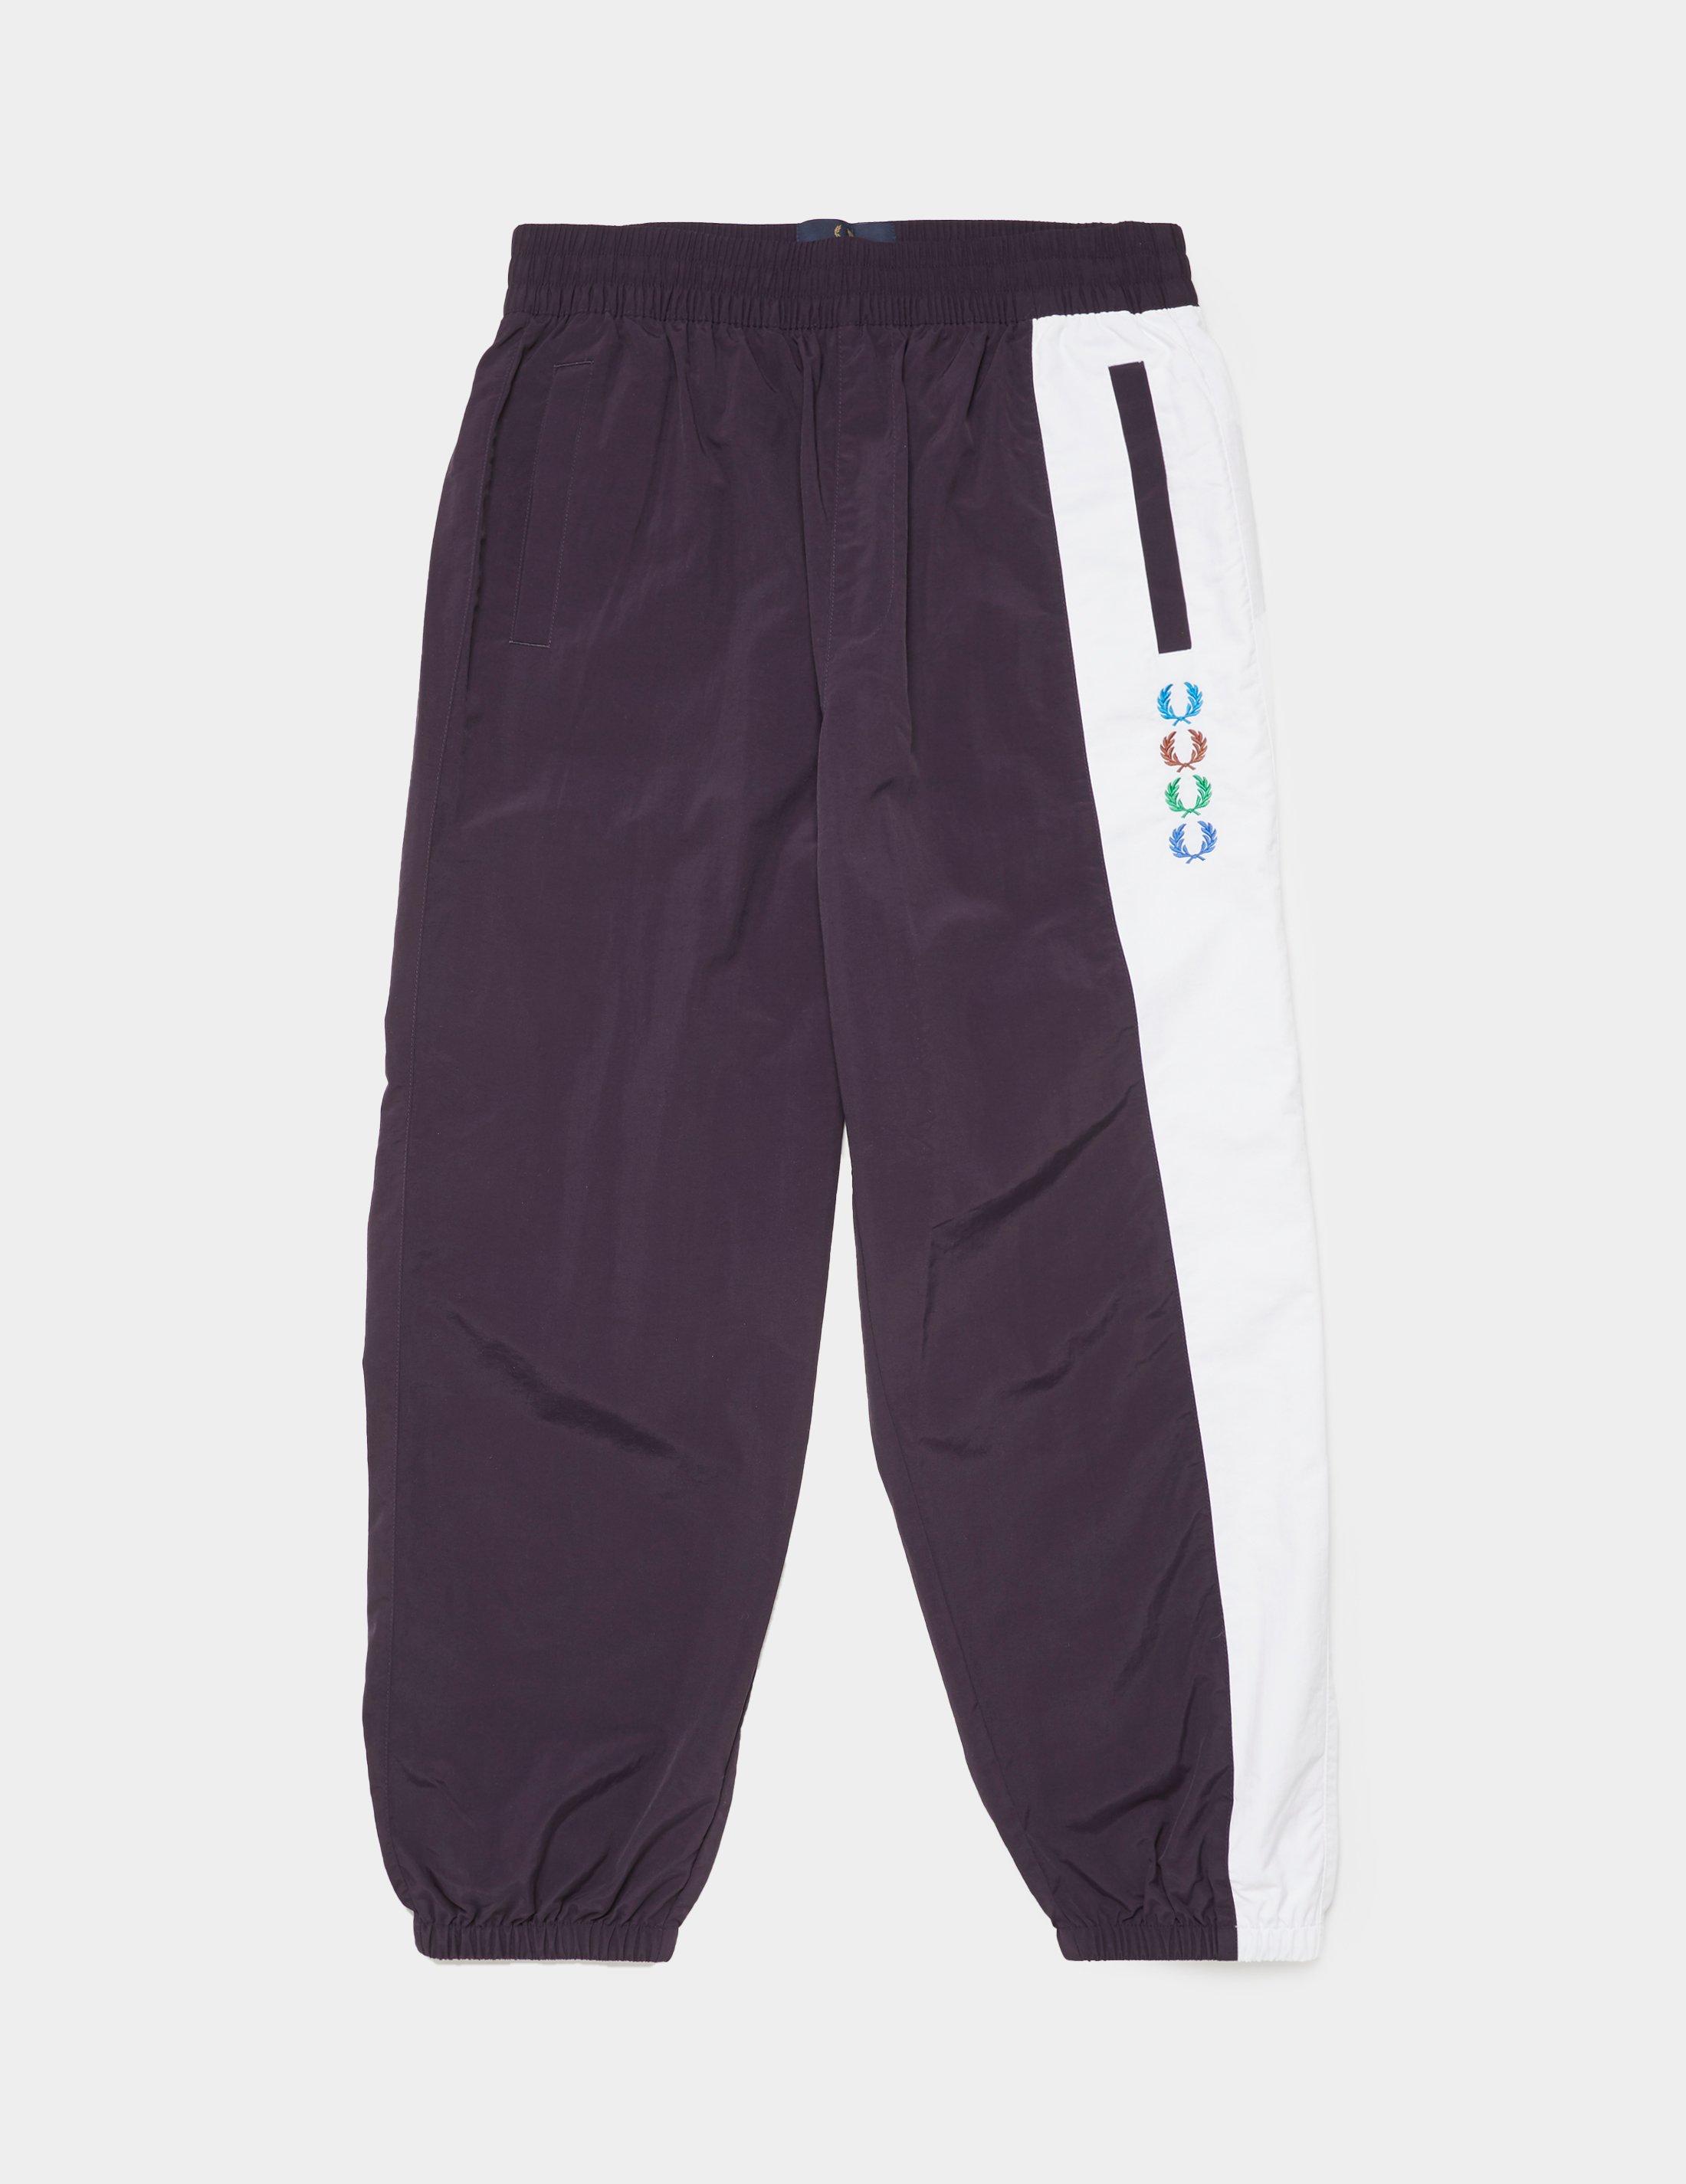 fred perry track bottoms